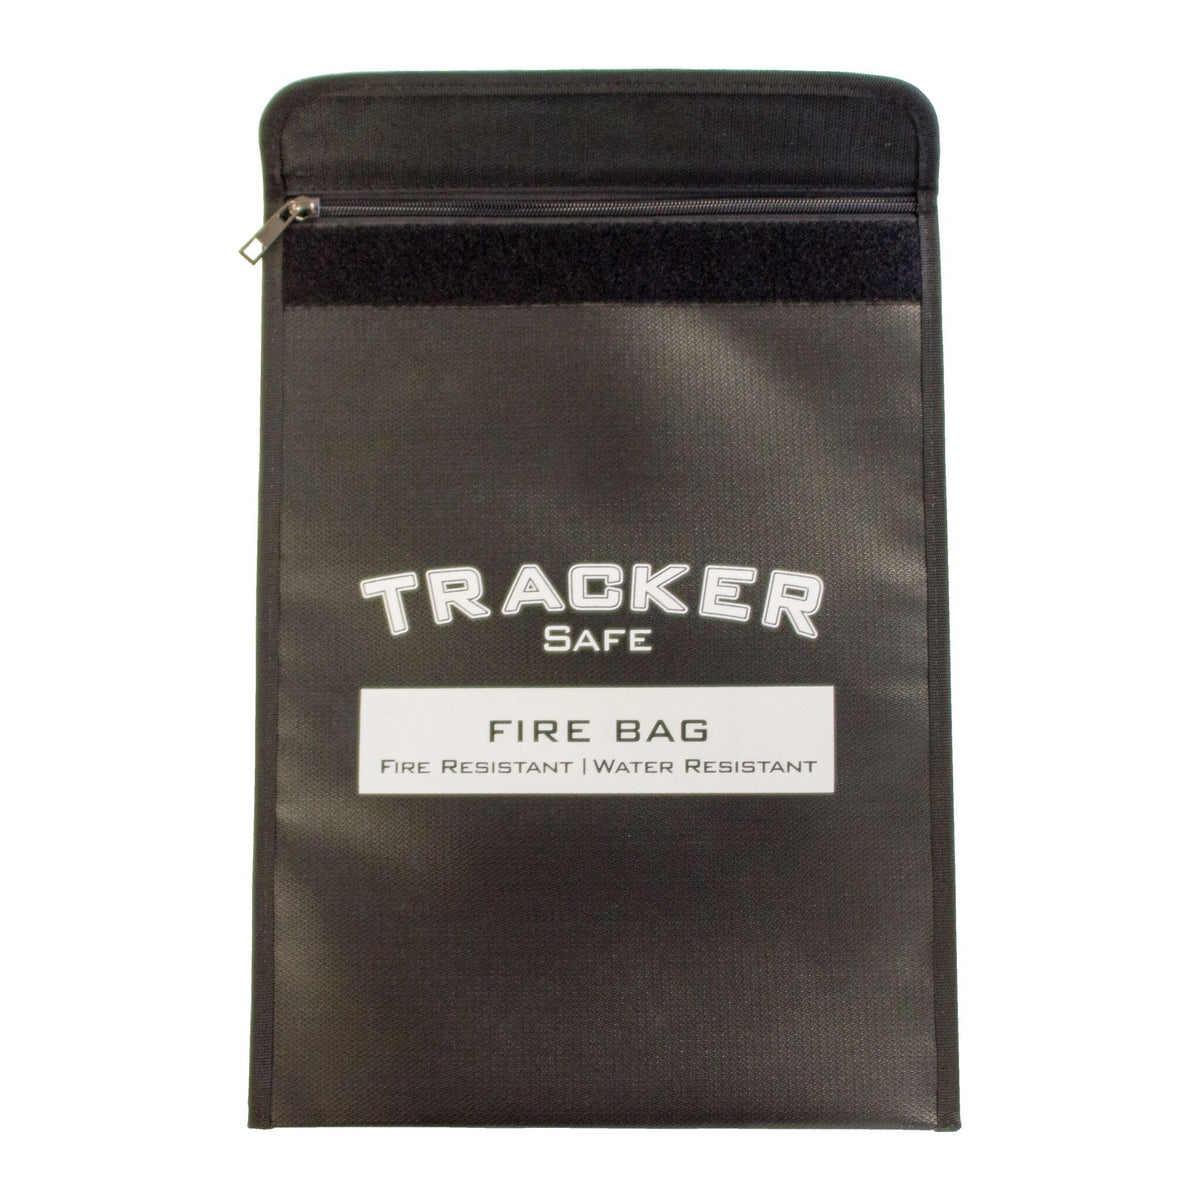 Tracker FB1511 Fire &amp; Water Resistant Bag Top Open Showing Velcro